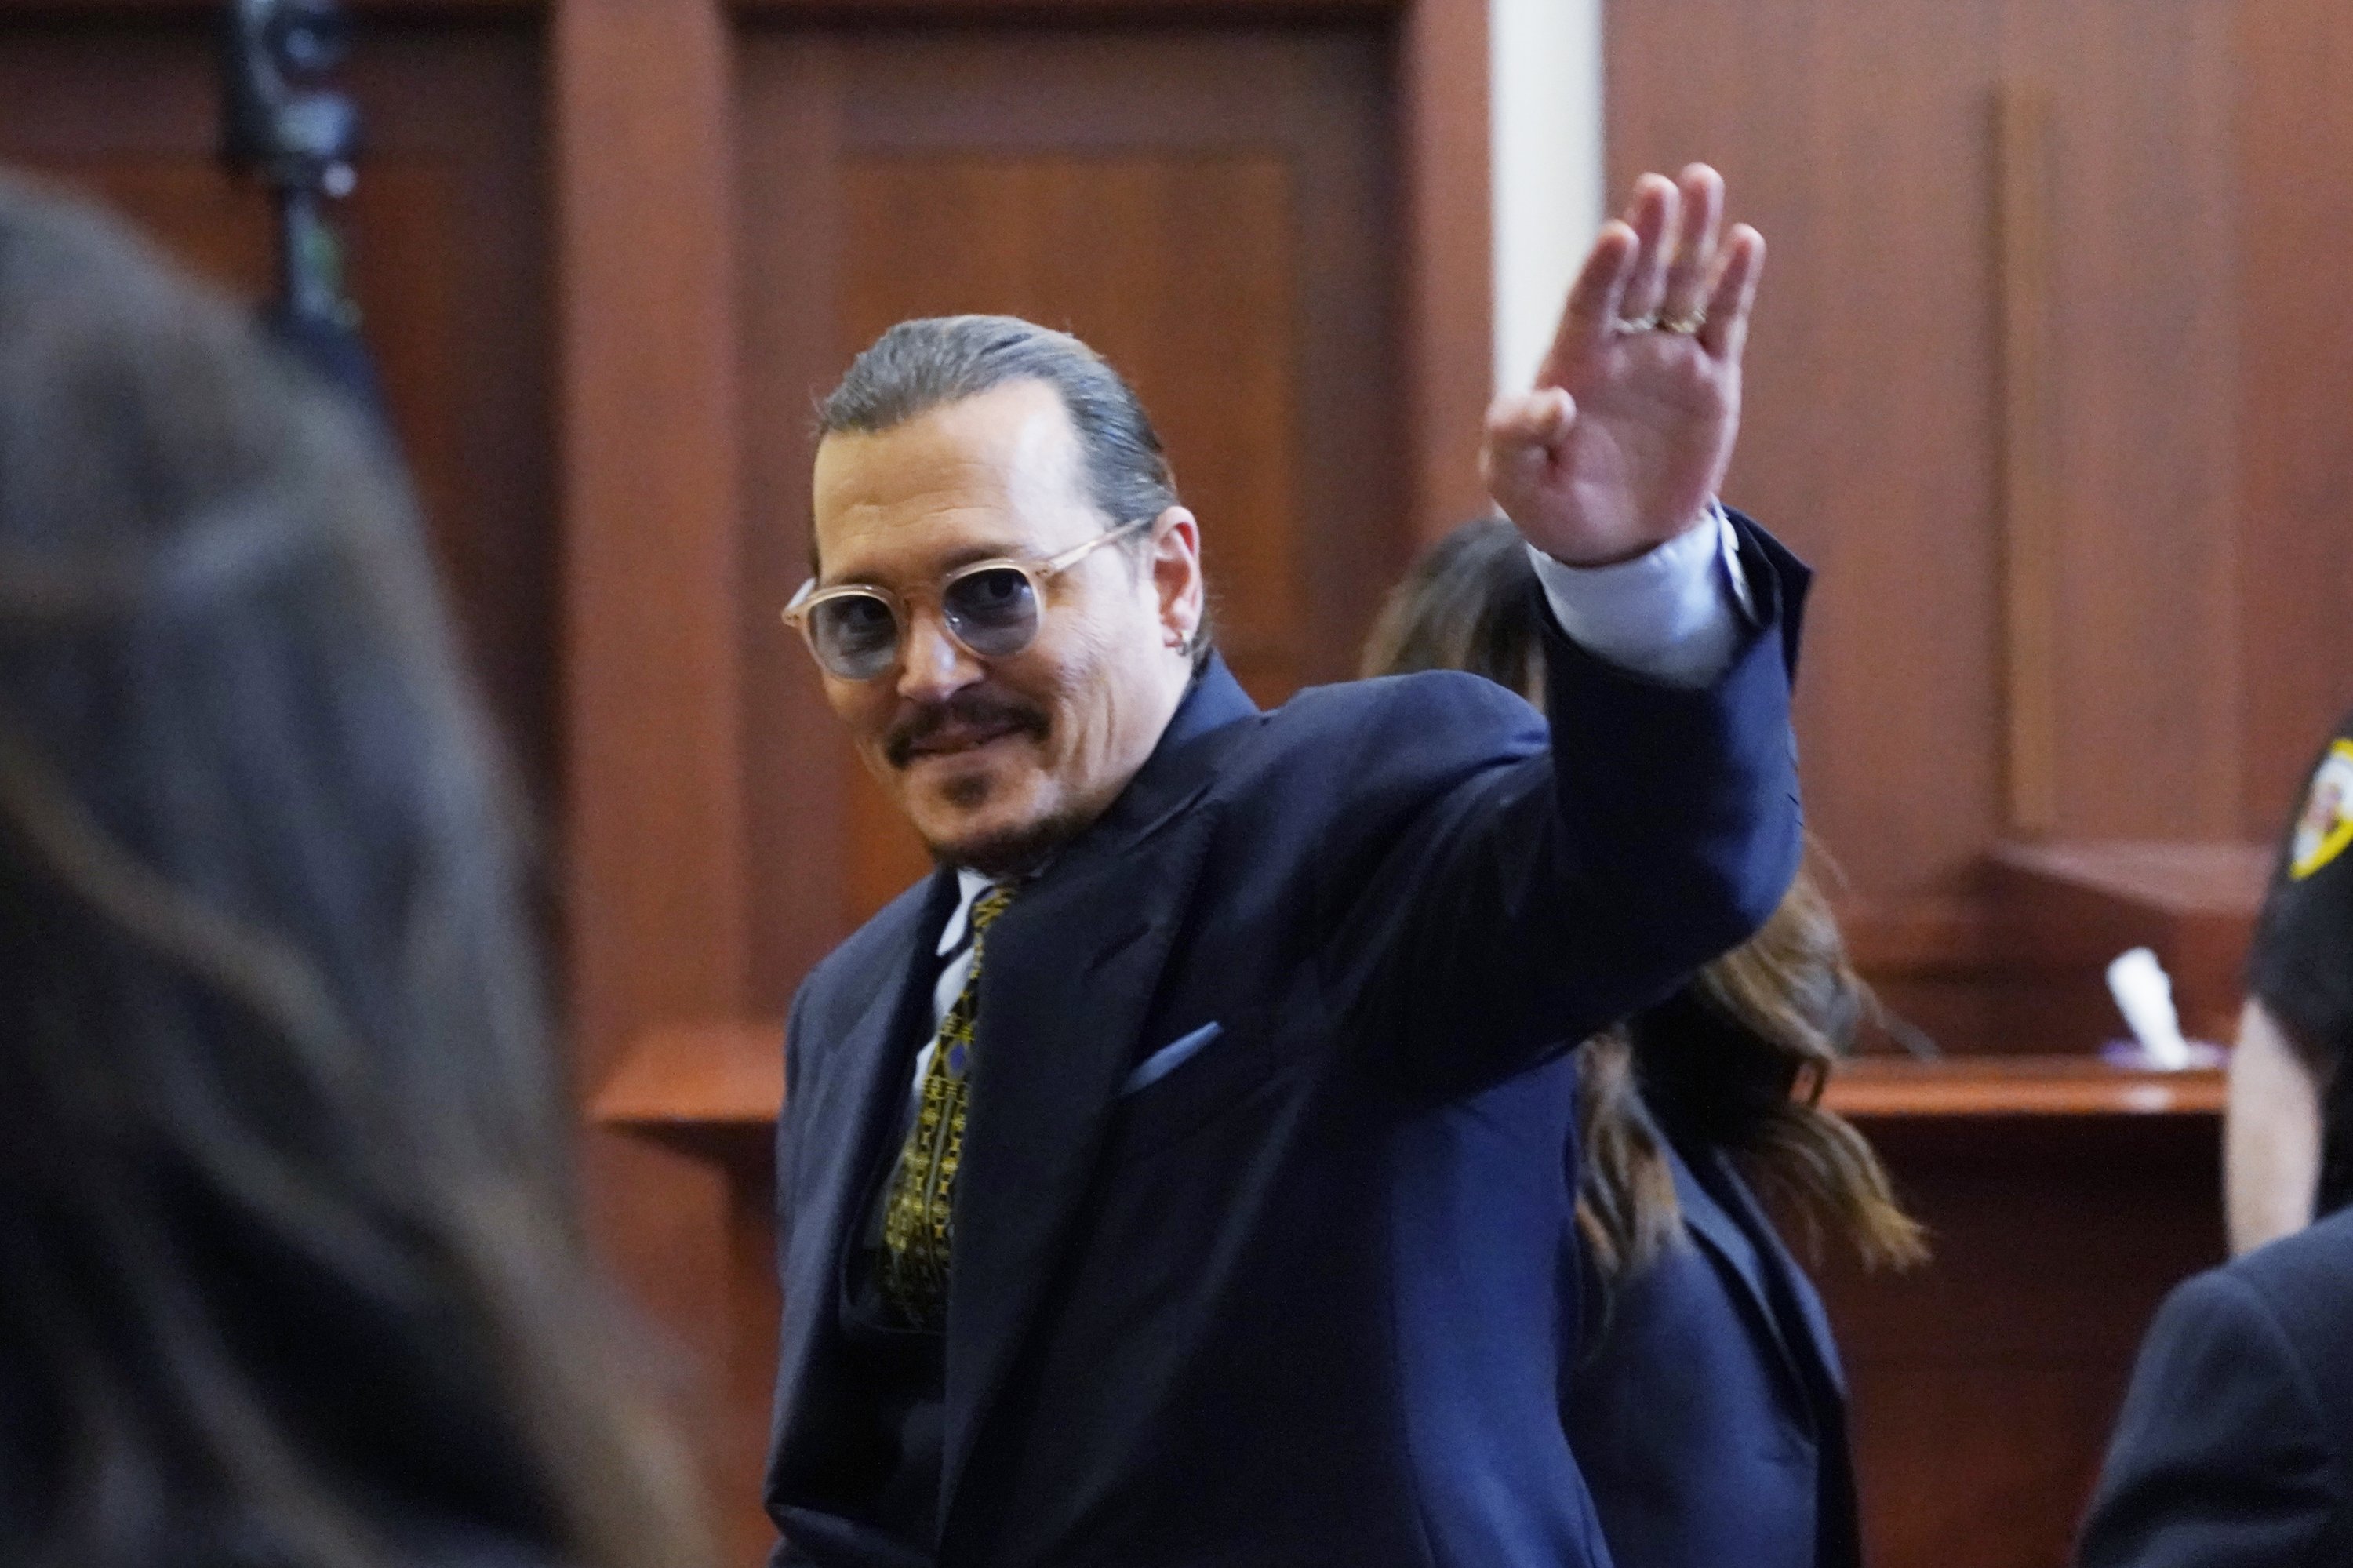 Actor Johnny Depp gestures to the gallery in the courtroom as he leaves for the day at the Fairfax County Circuit Courthouse in Fairfax, Virginia, US, May 23, 2022. (AP)